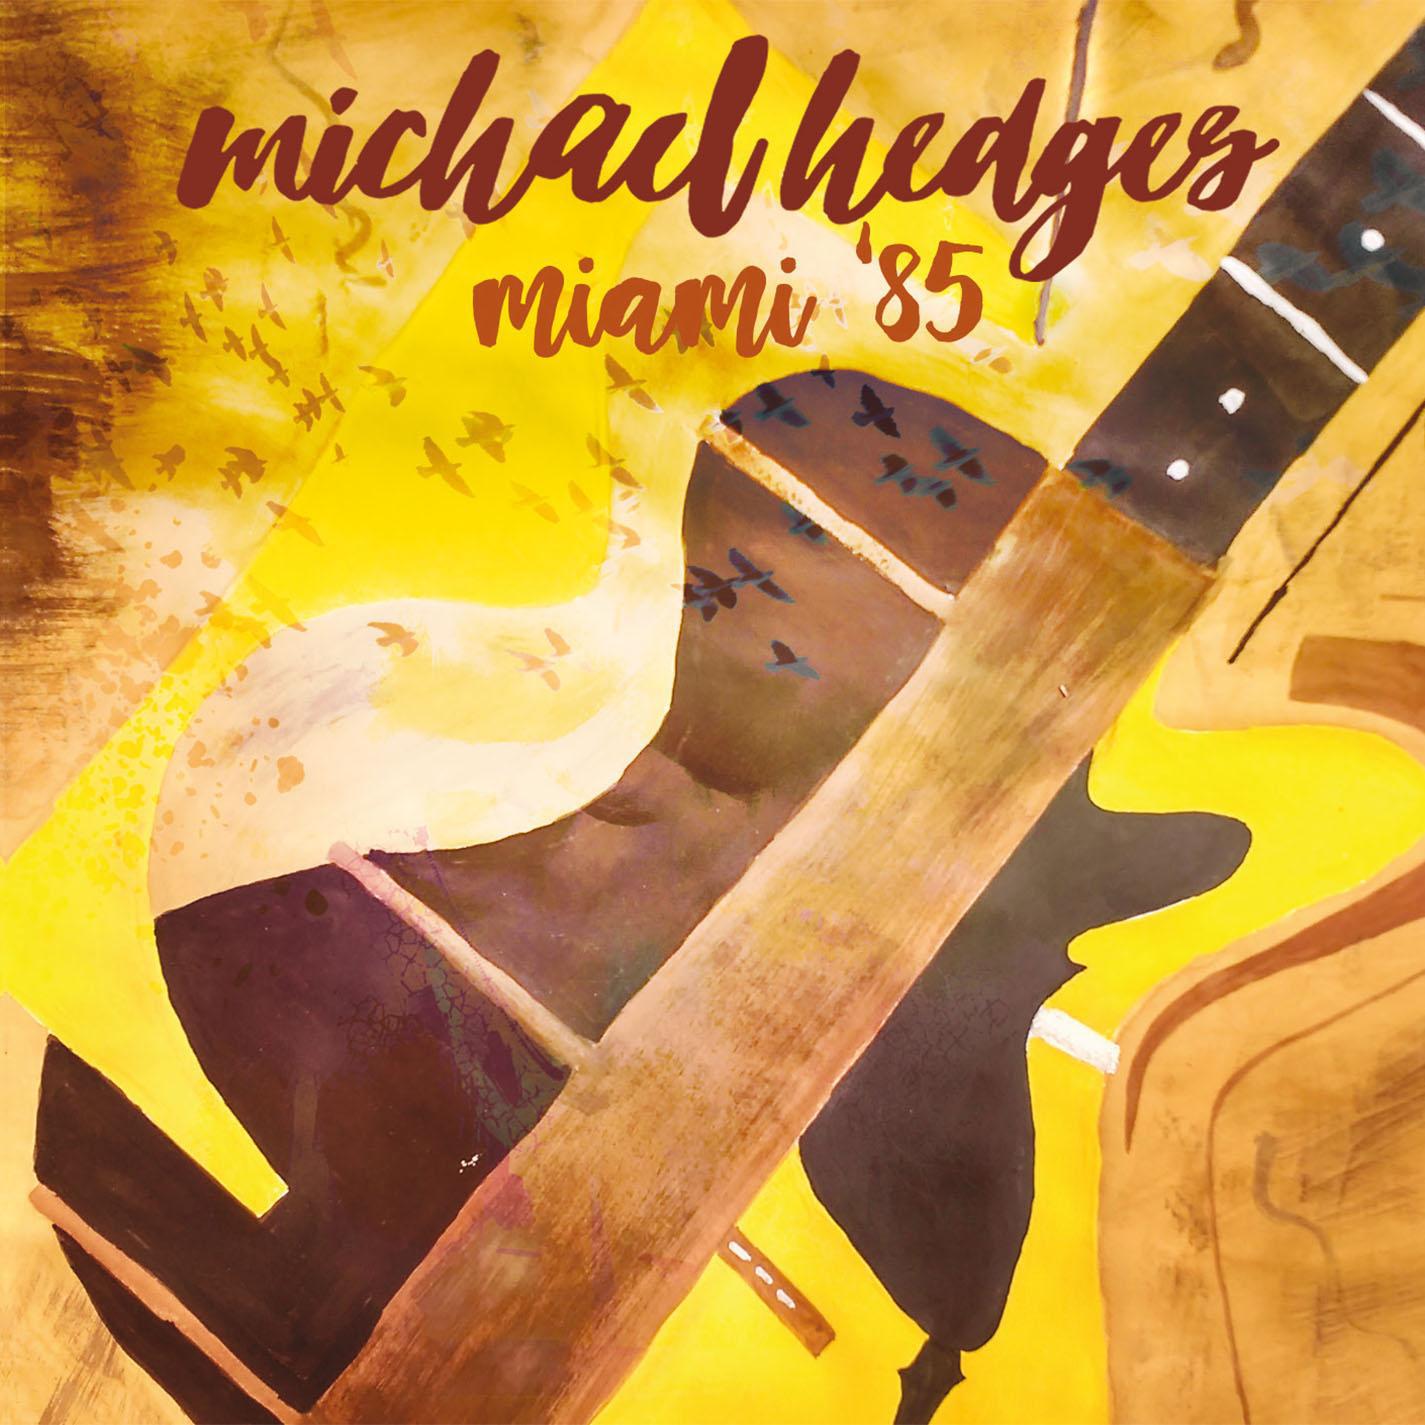 Michael Hedges - Baby Toes (Studio Session WCBN Miami 1985)